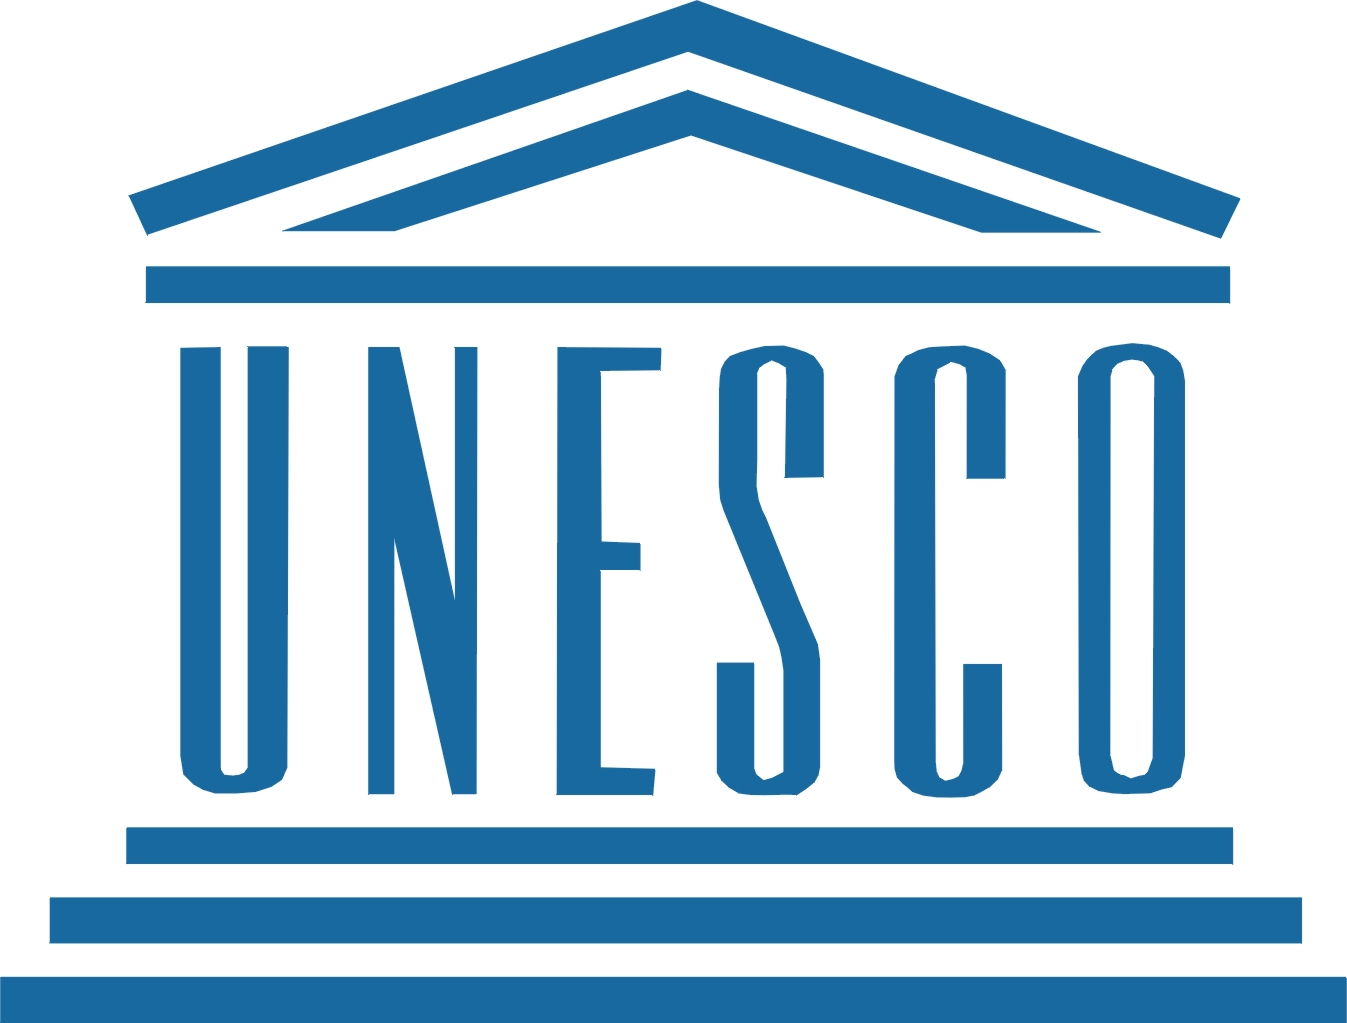 UNESCO received notification of Israel's withdrawal from organization